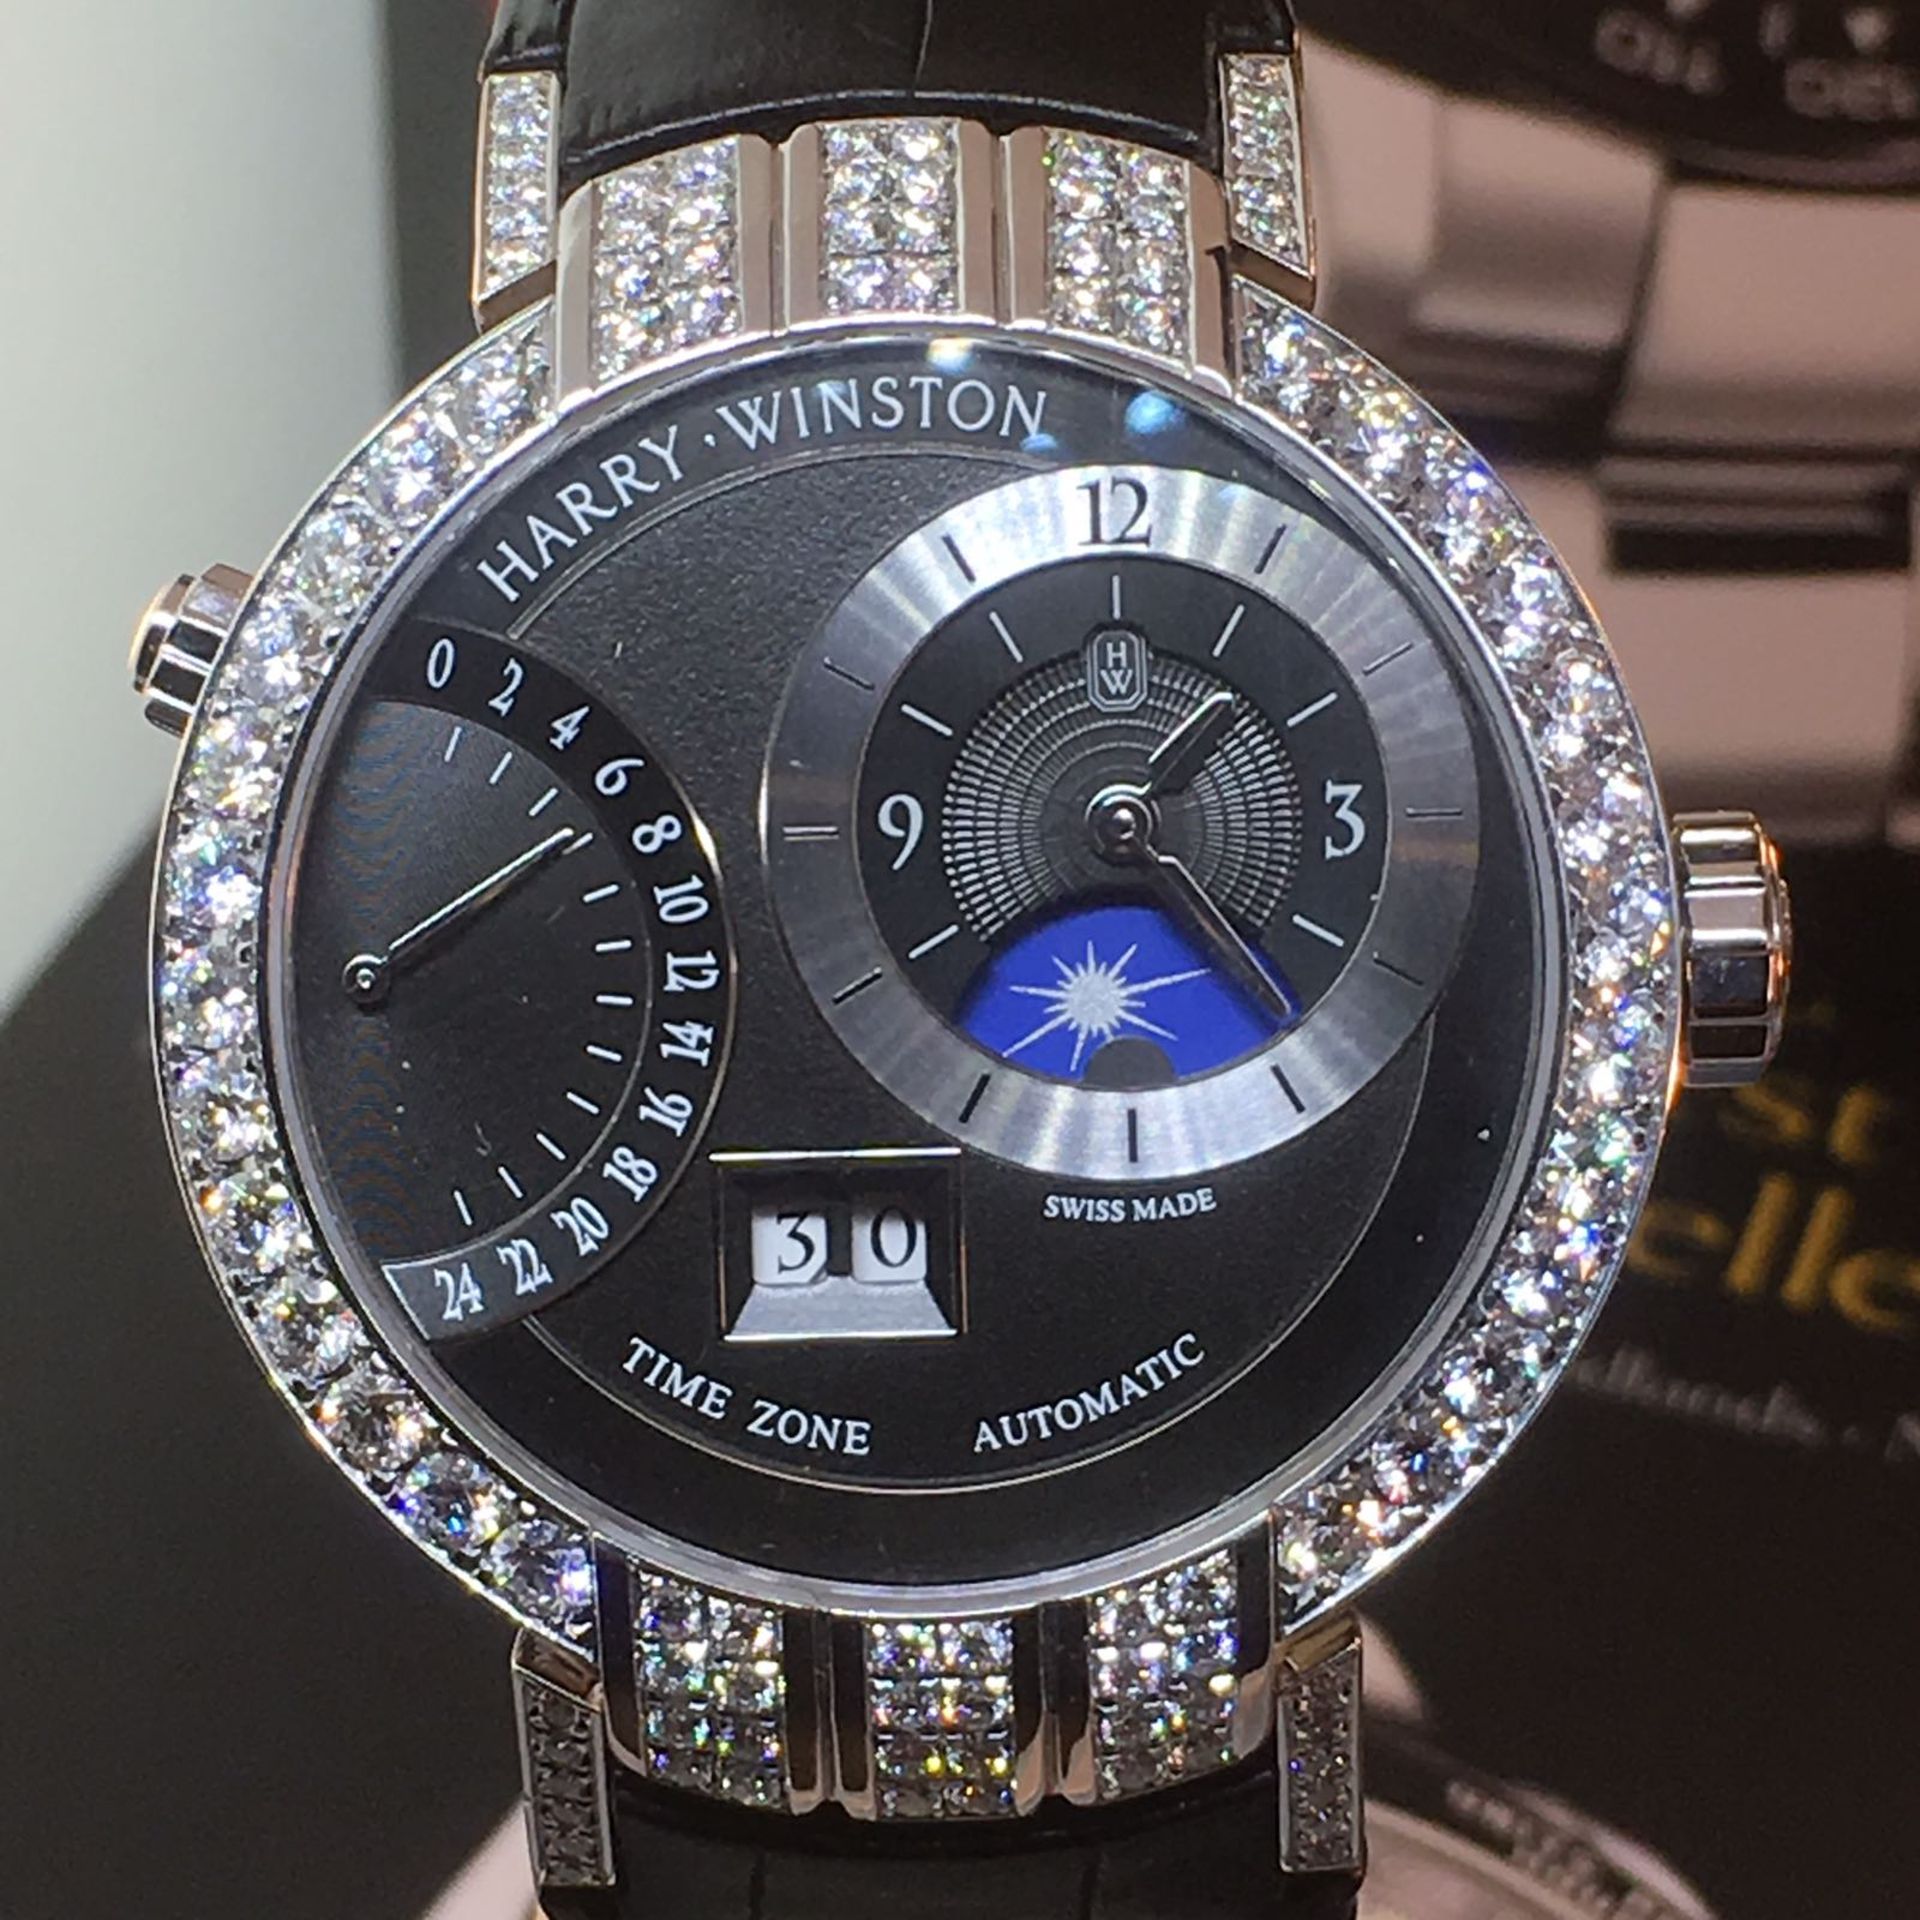 HARRY WINSTON Premier Excenter 18k White Gold Watch with box & papers - Image 2 of 9